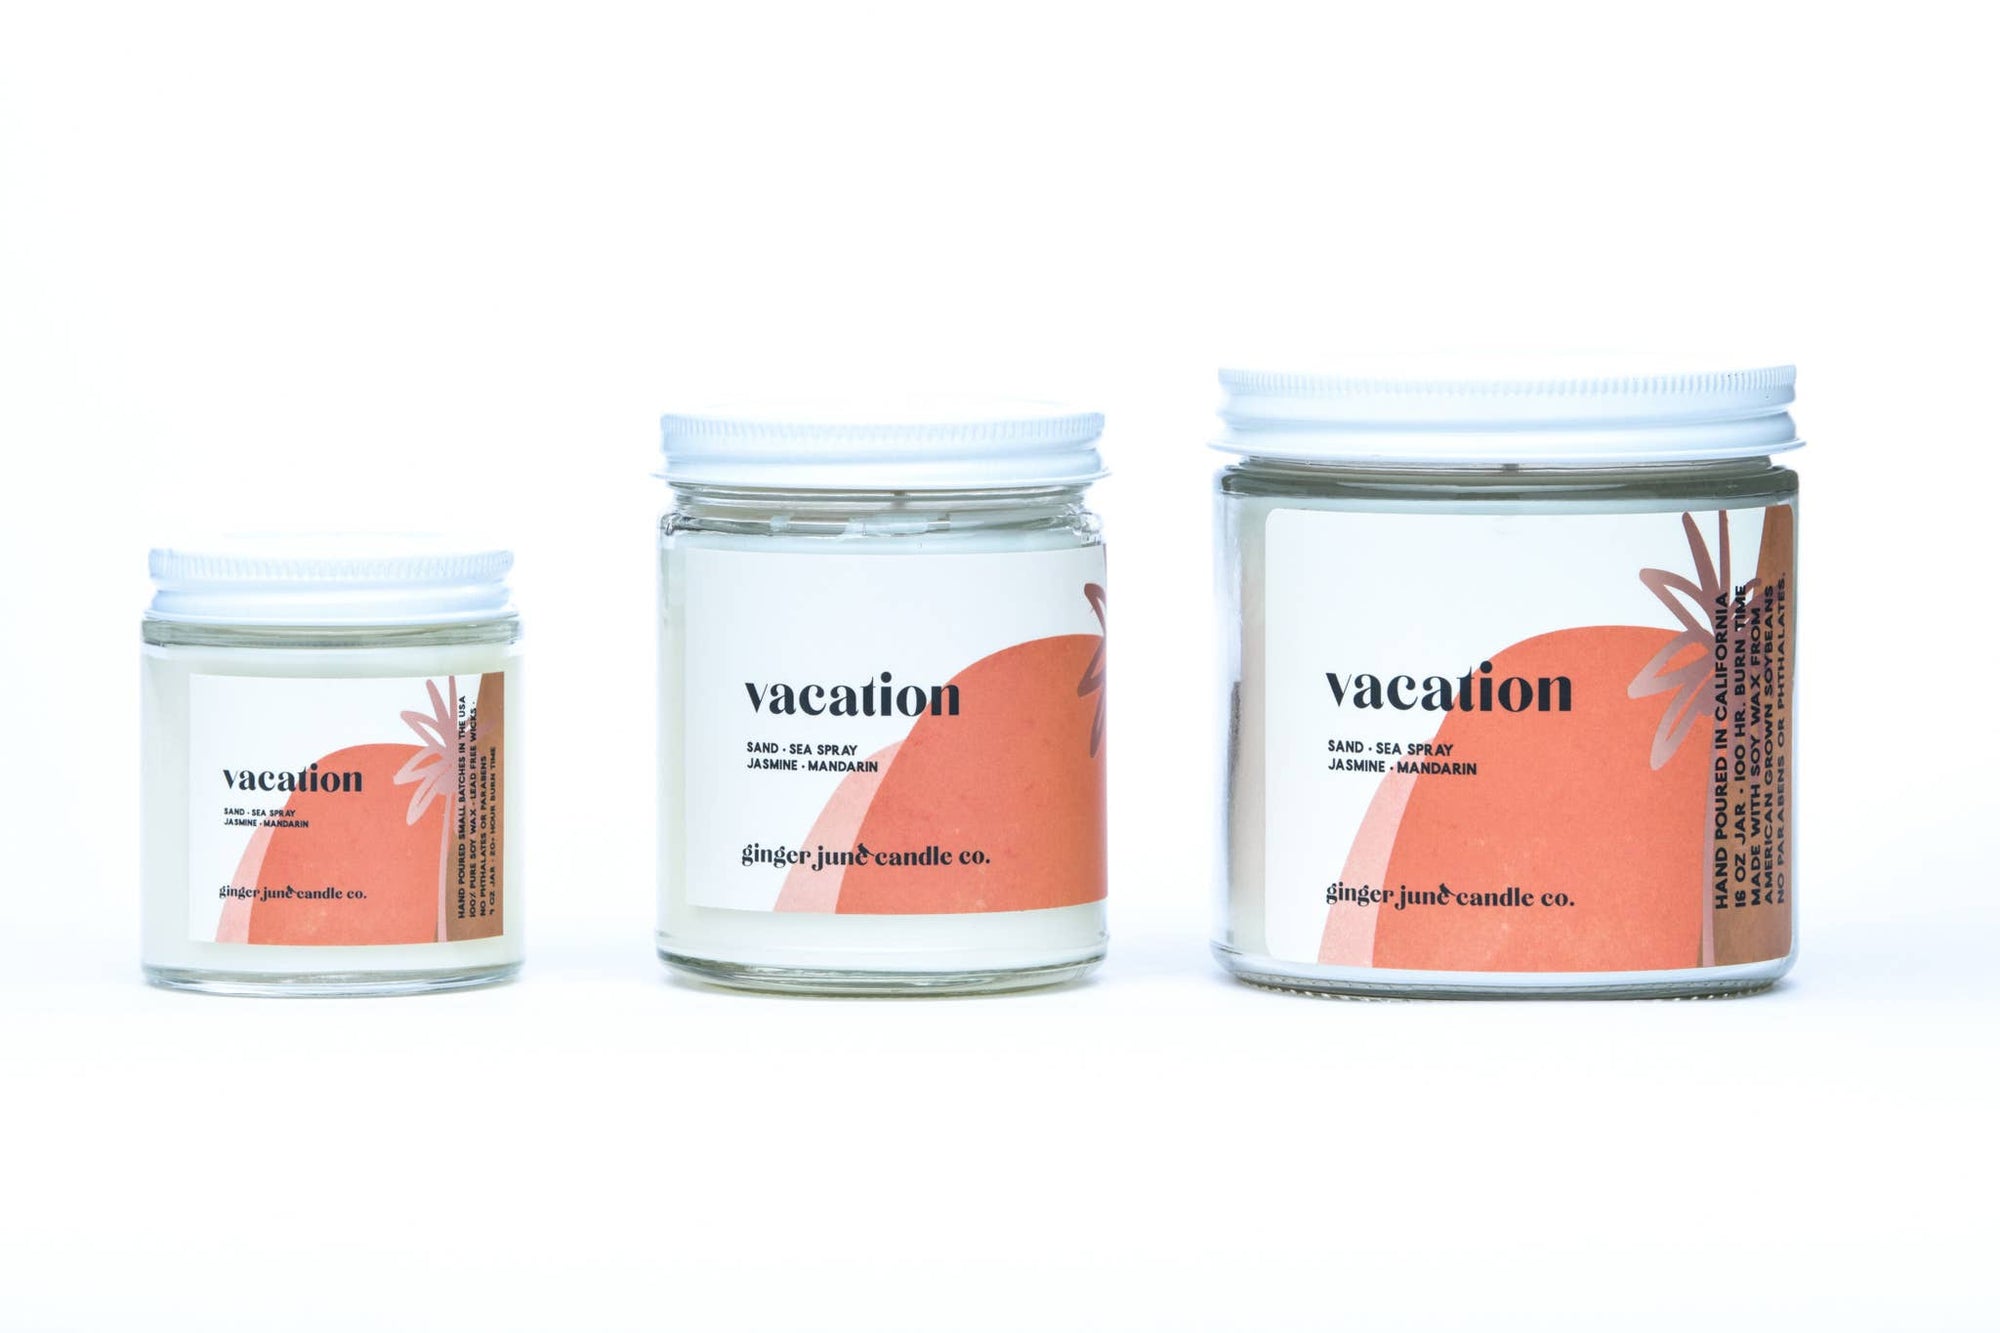 Vacation Terra Candle by Ginger June